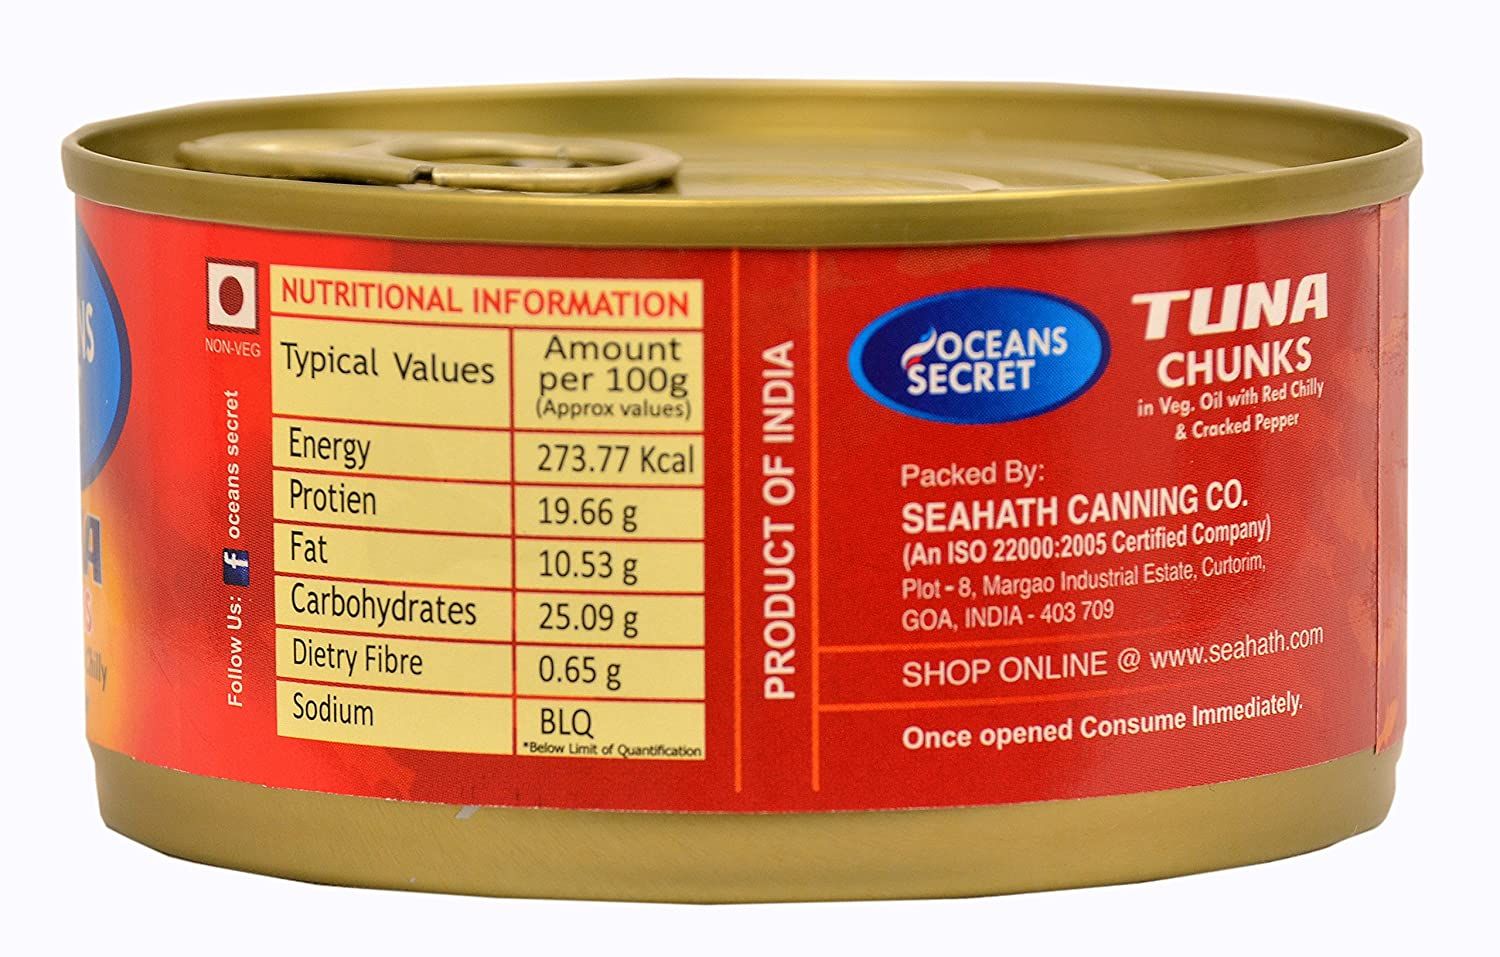 Ocean's Secret Canned Tuna in Chilly Pepper Image